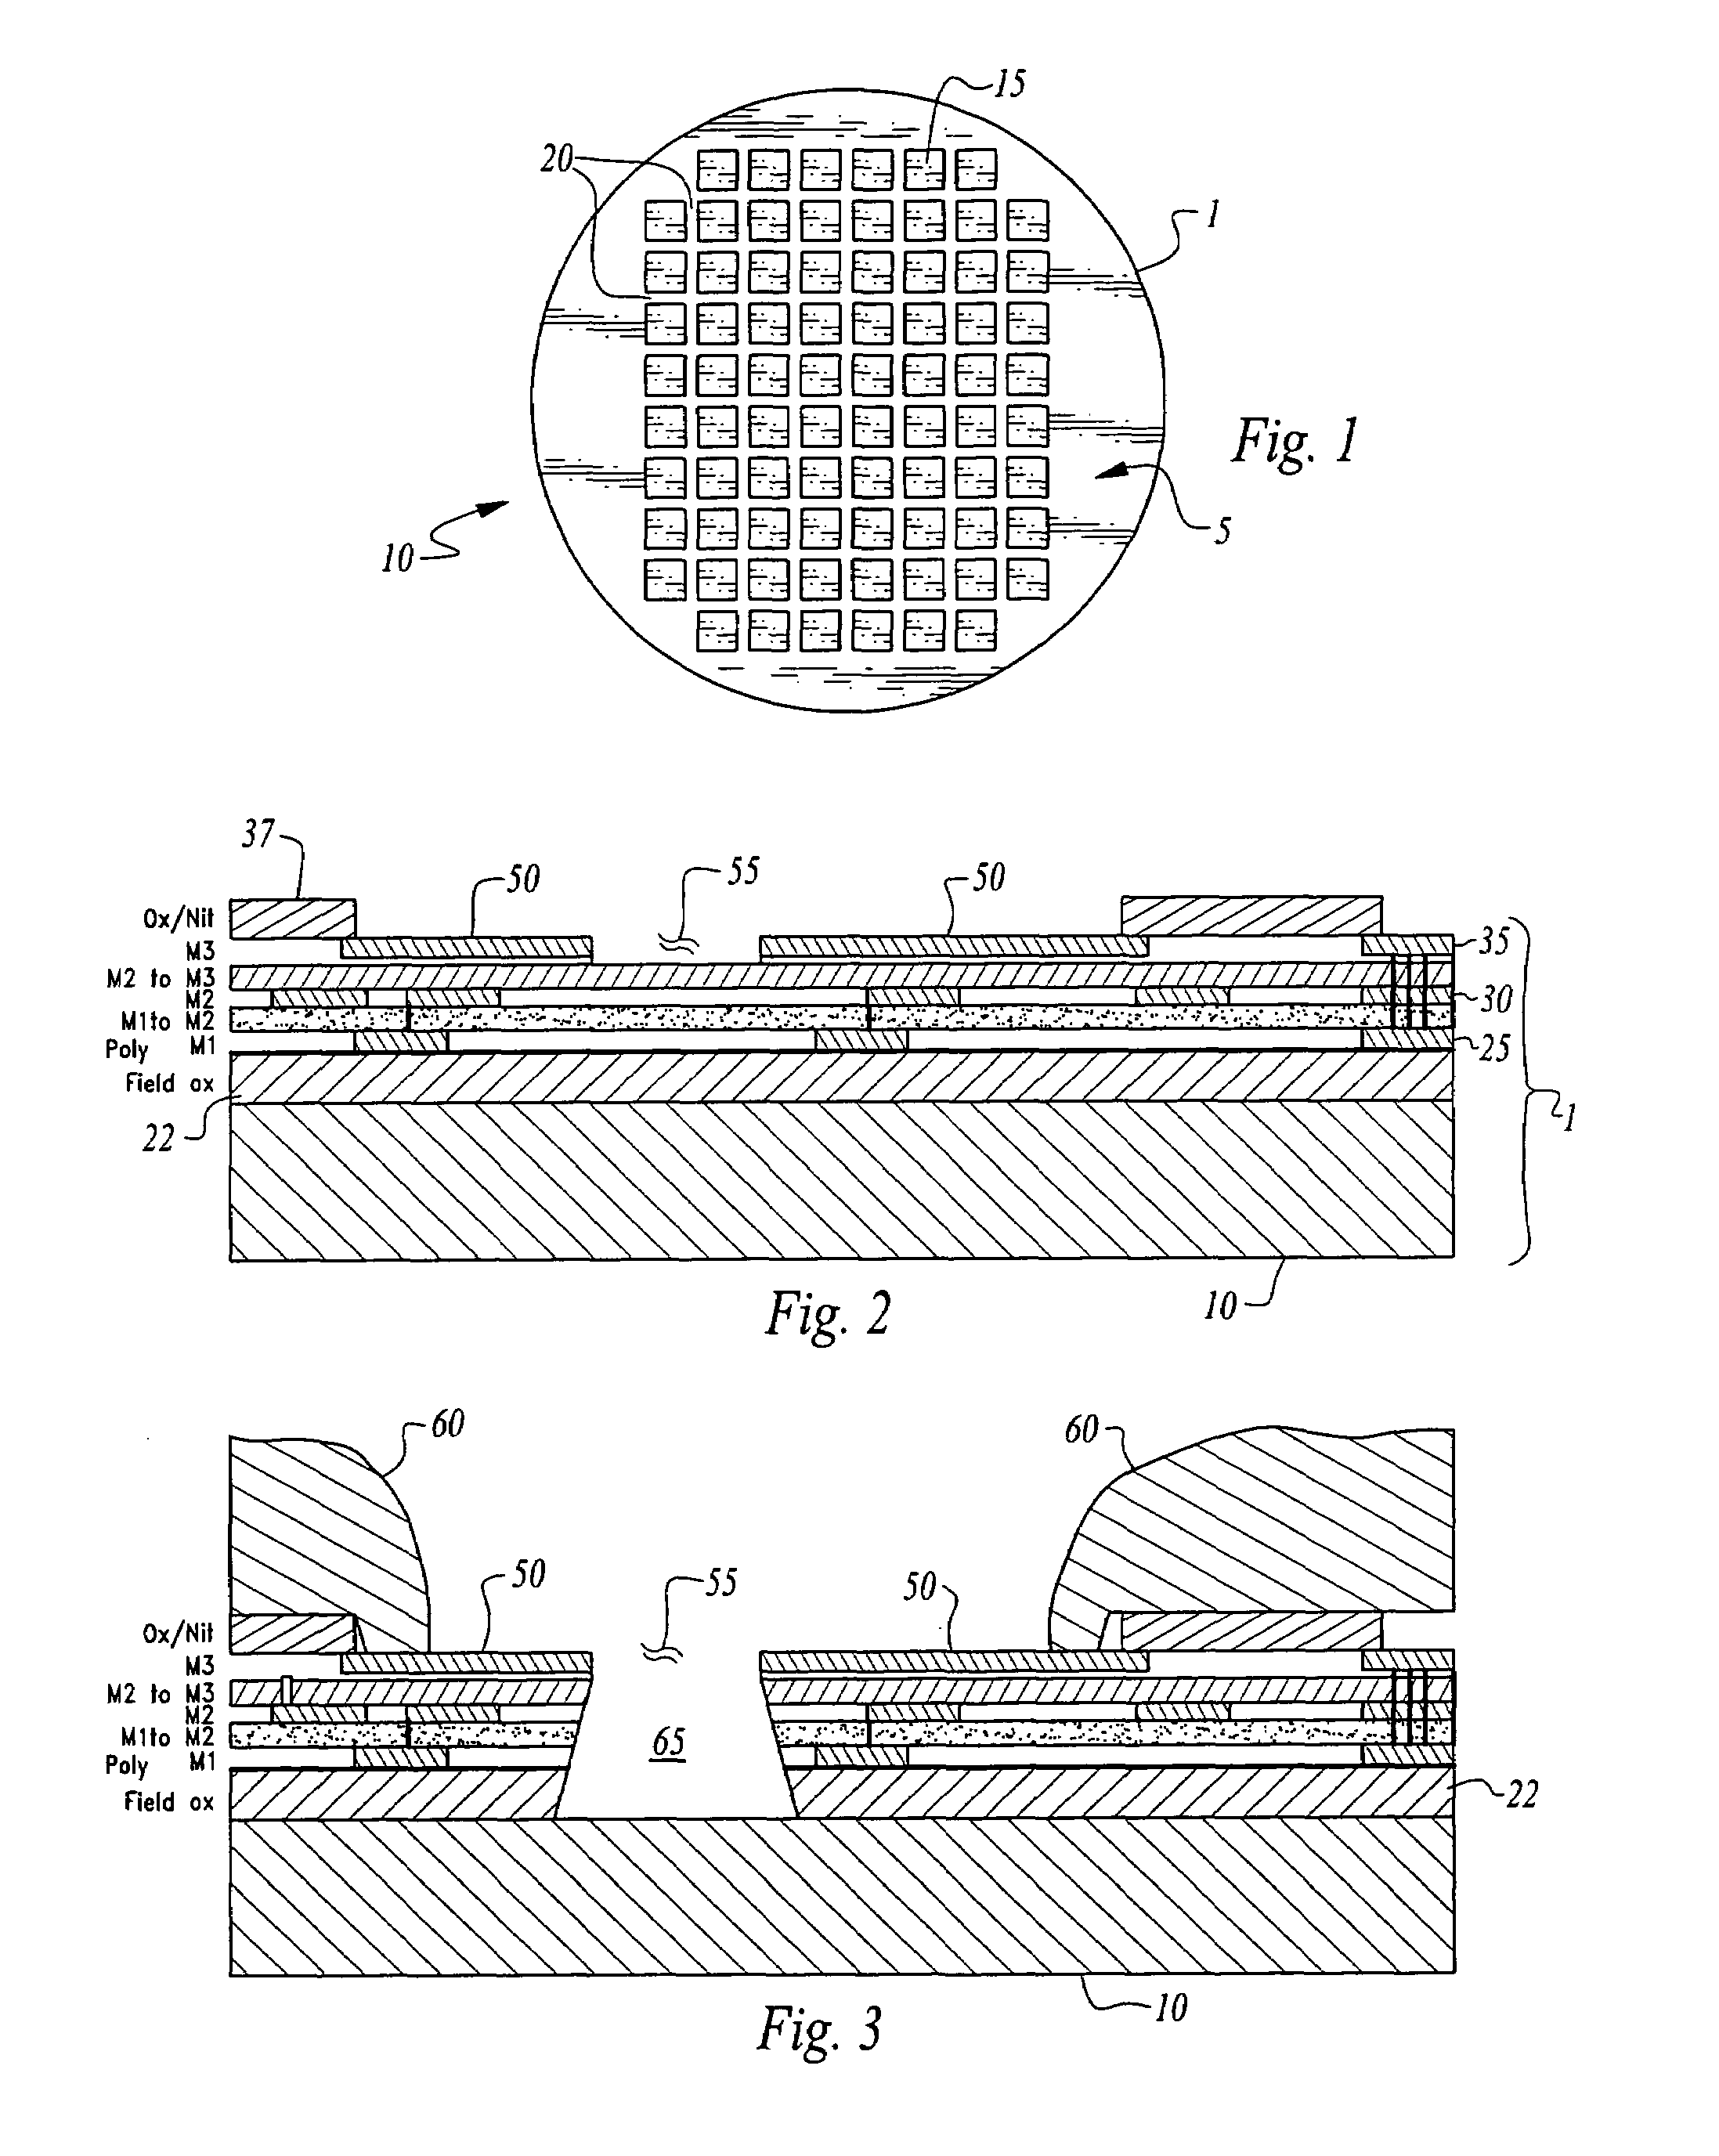 Method for precision integrated circuit die singulation using differential etch rates